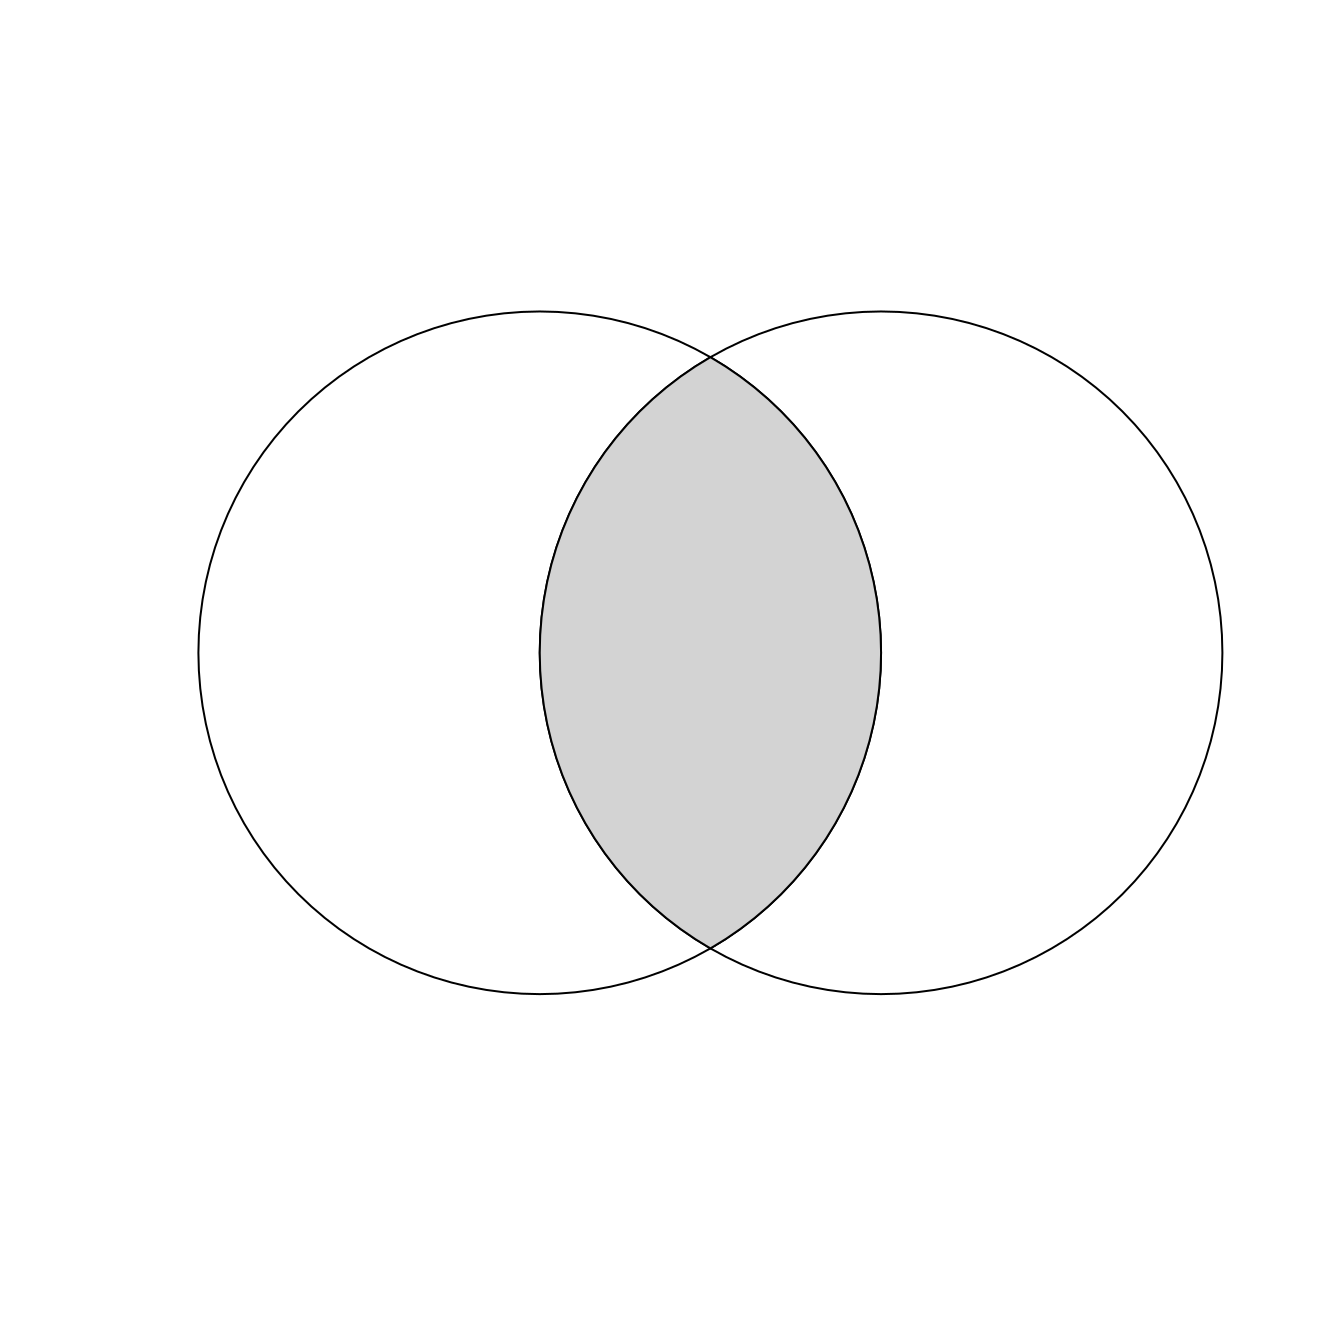 Overlapping circles with a gray color indicating intersection between them.